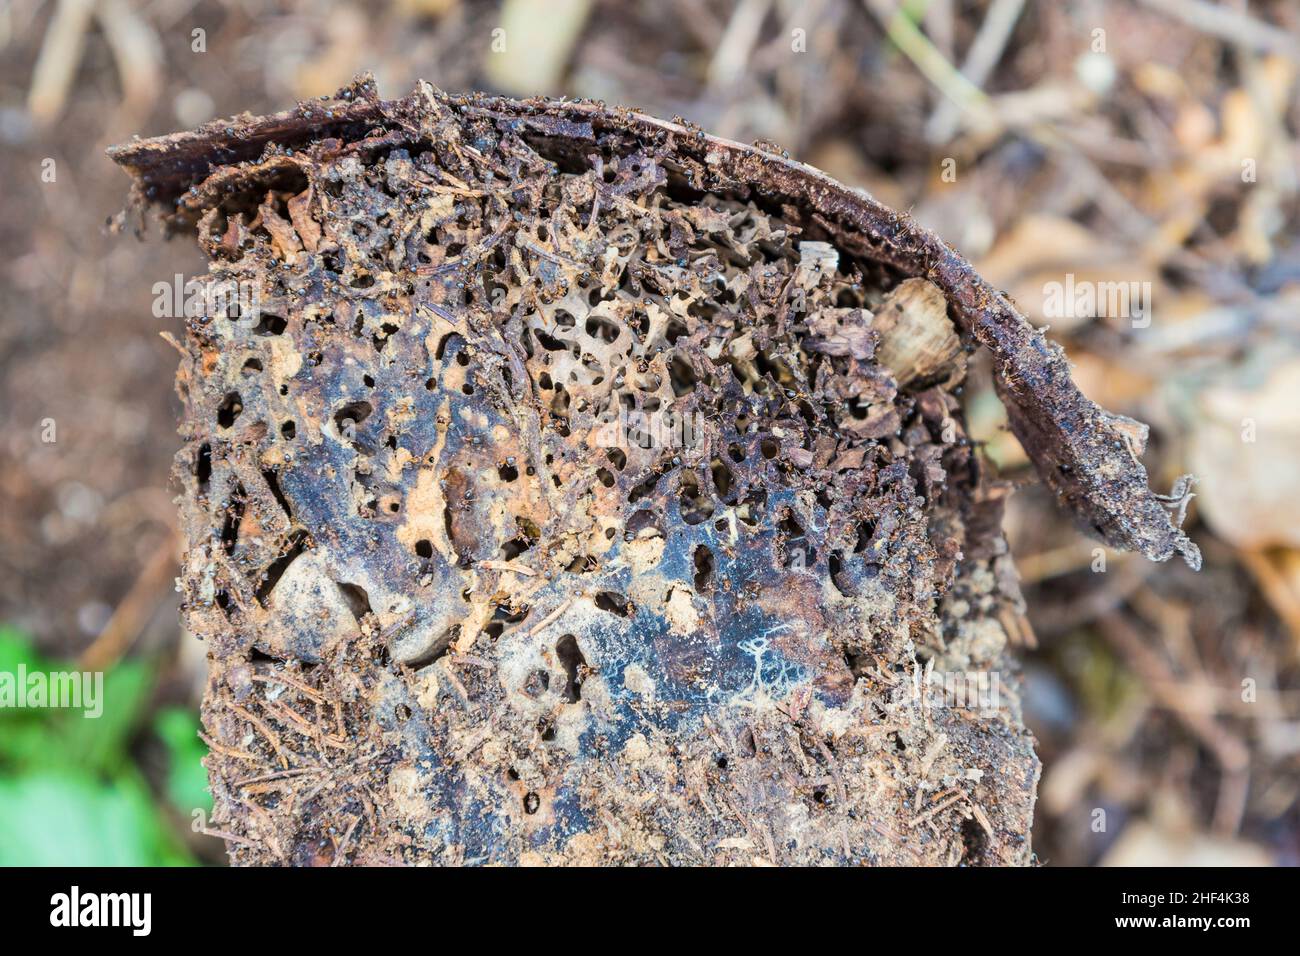 ants crawling in the old wooden tree stump Stock Photo